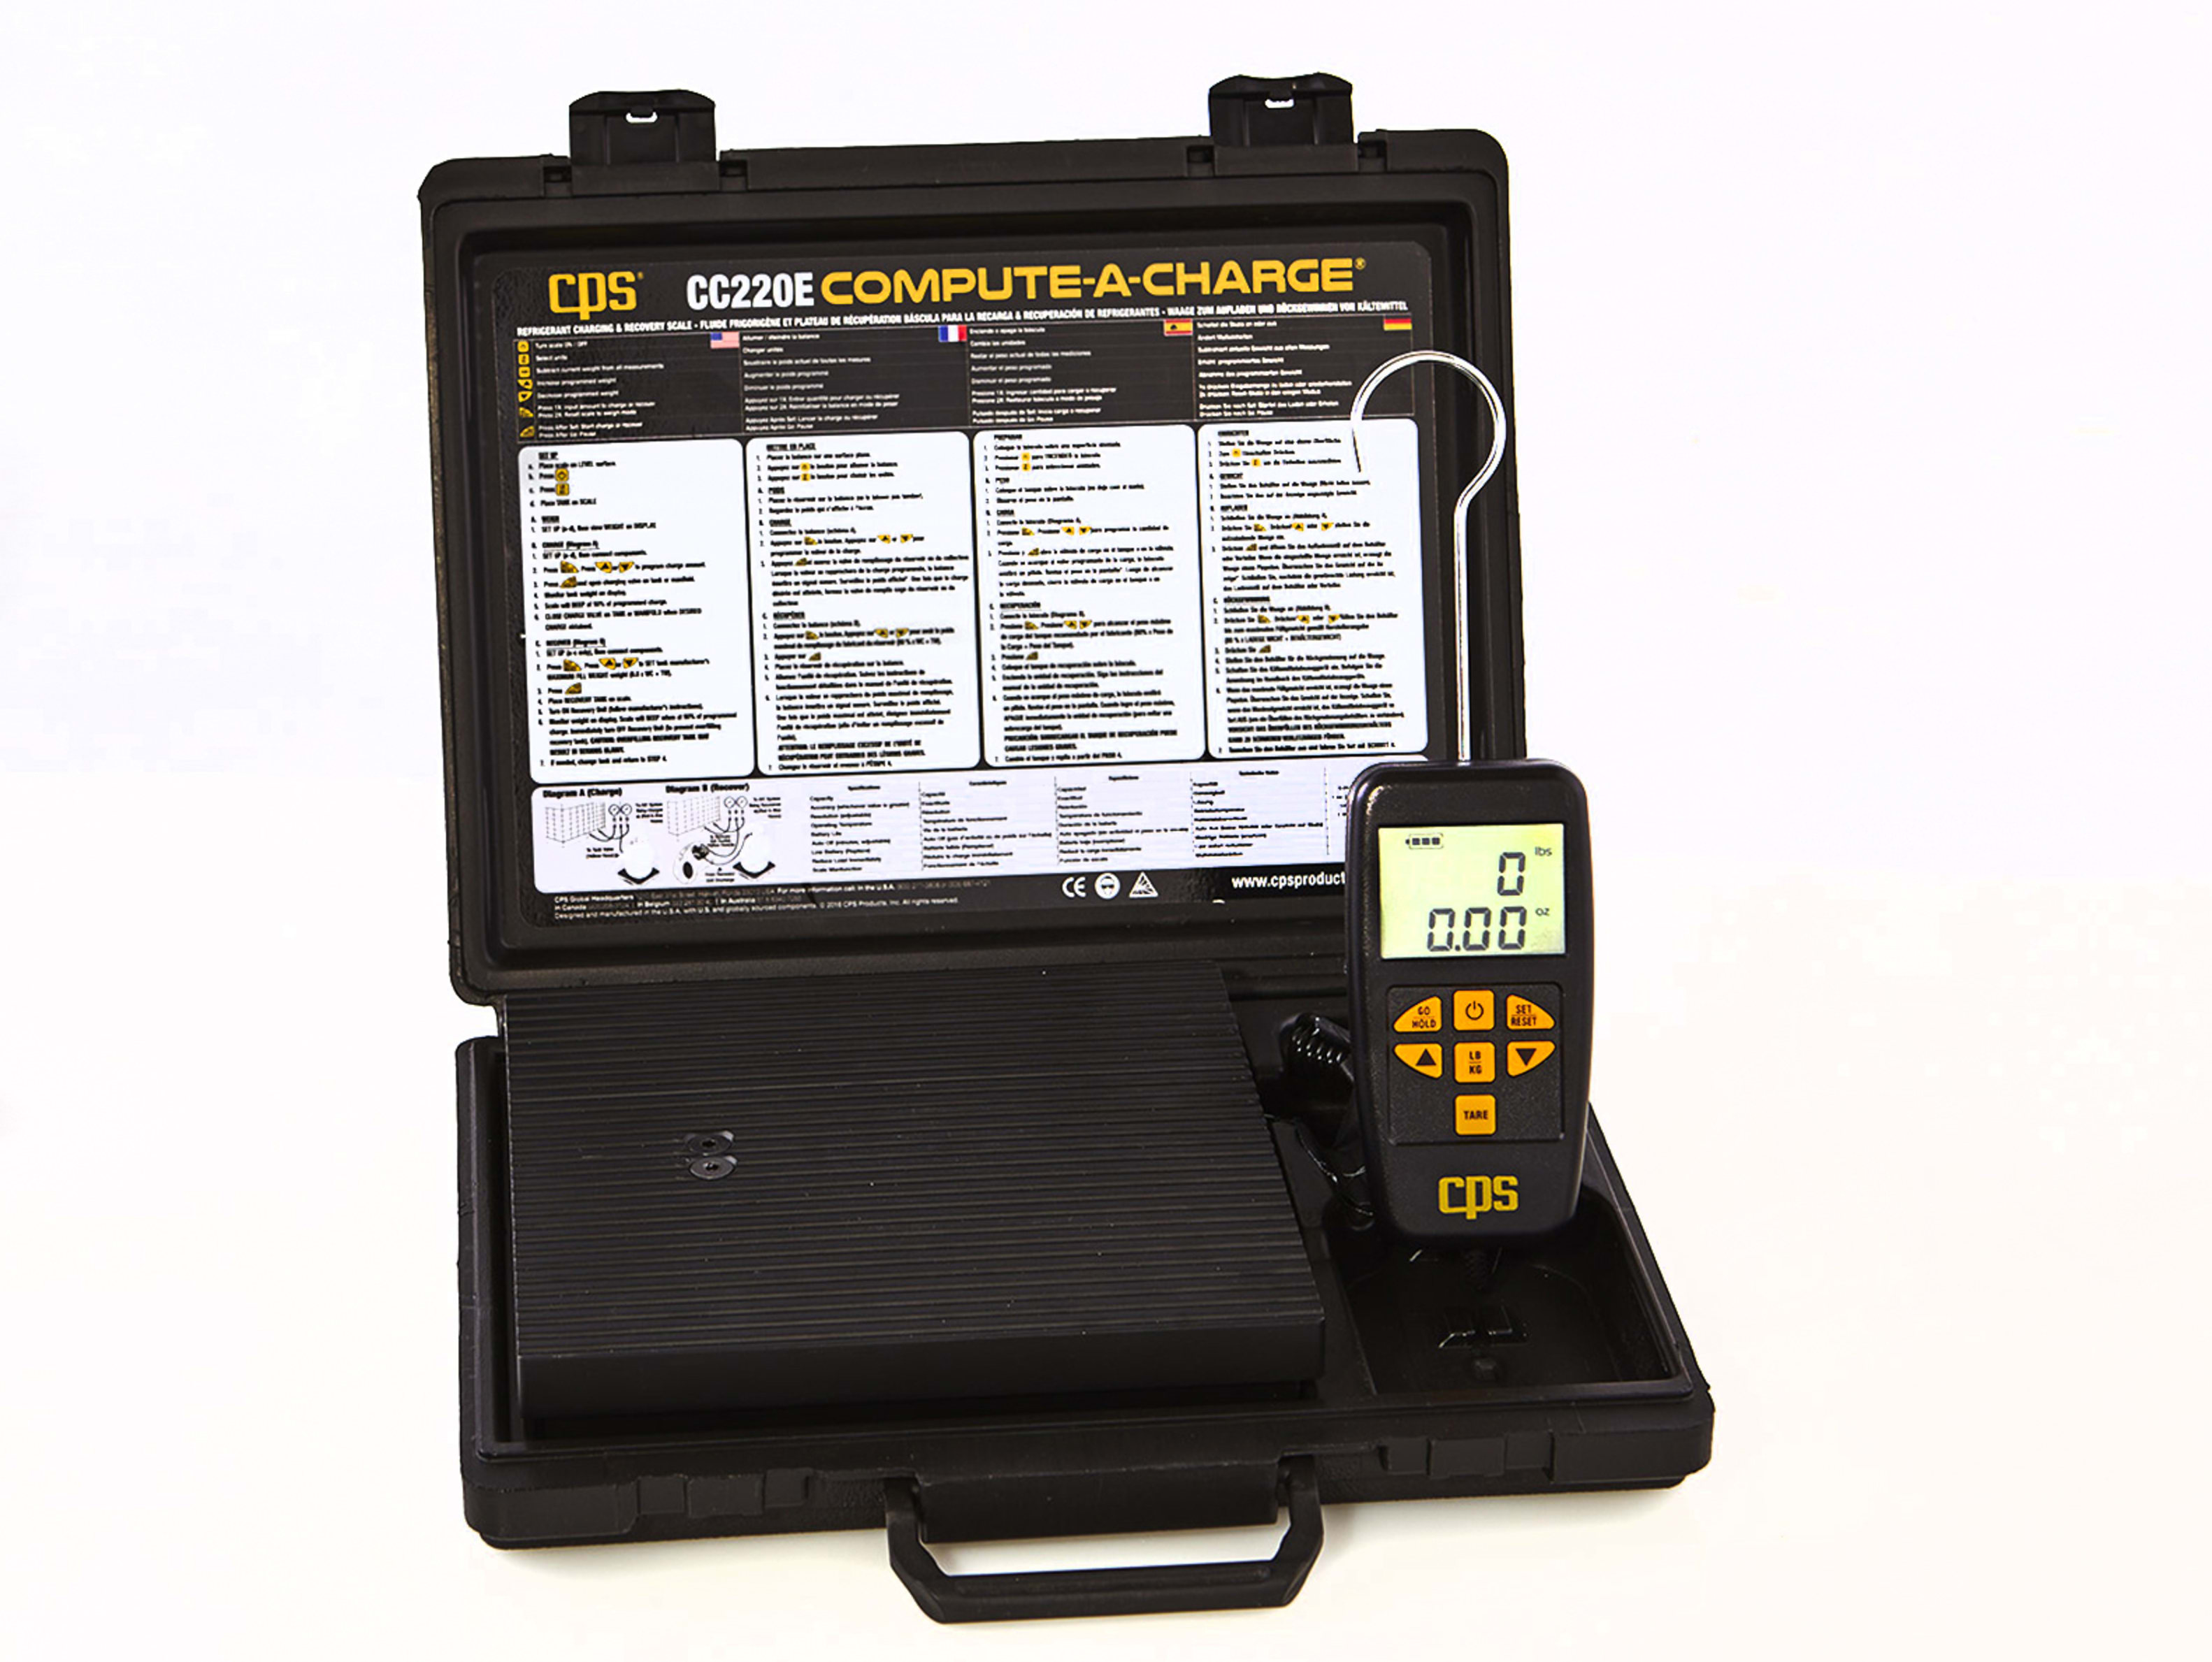 CC220 Compute-a-Charge Scale + Replacement | CPS Products